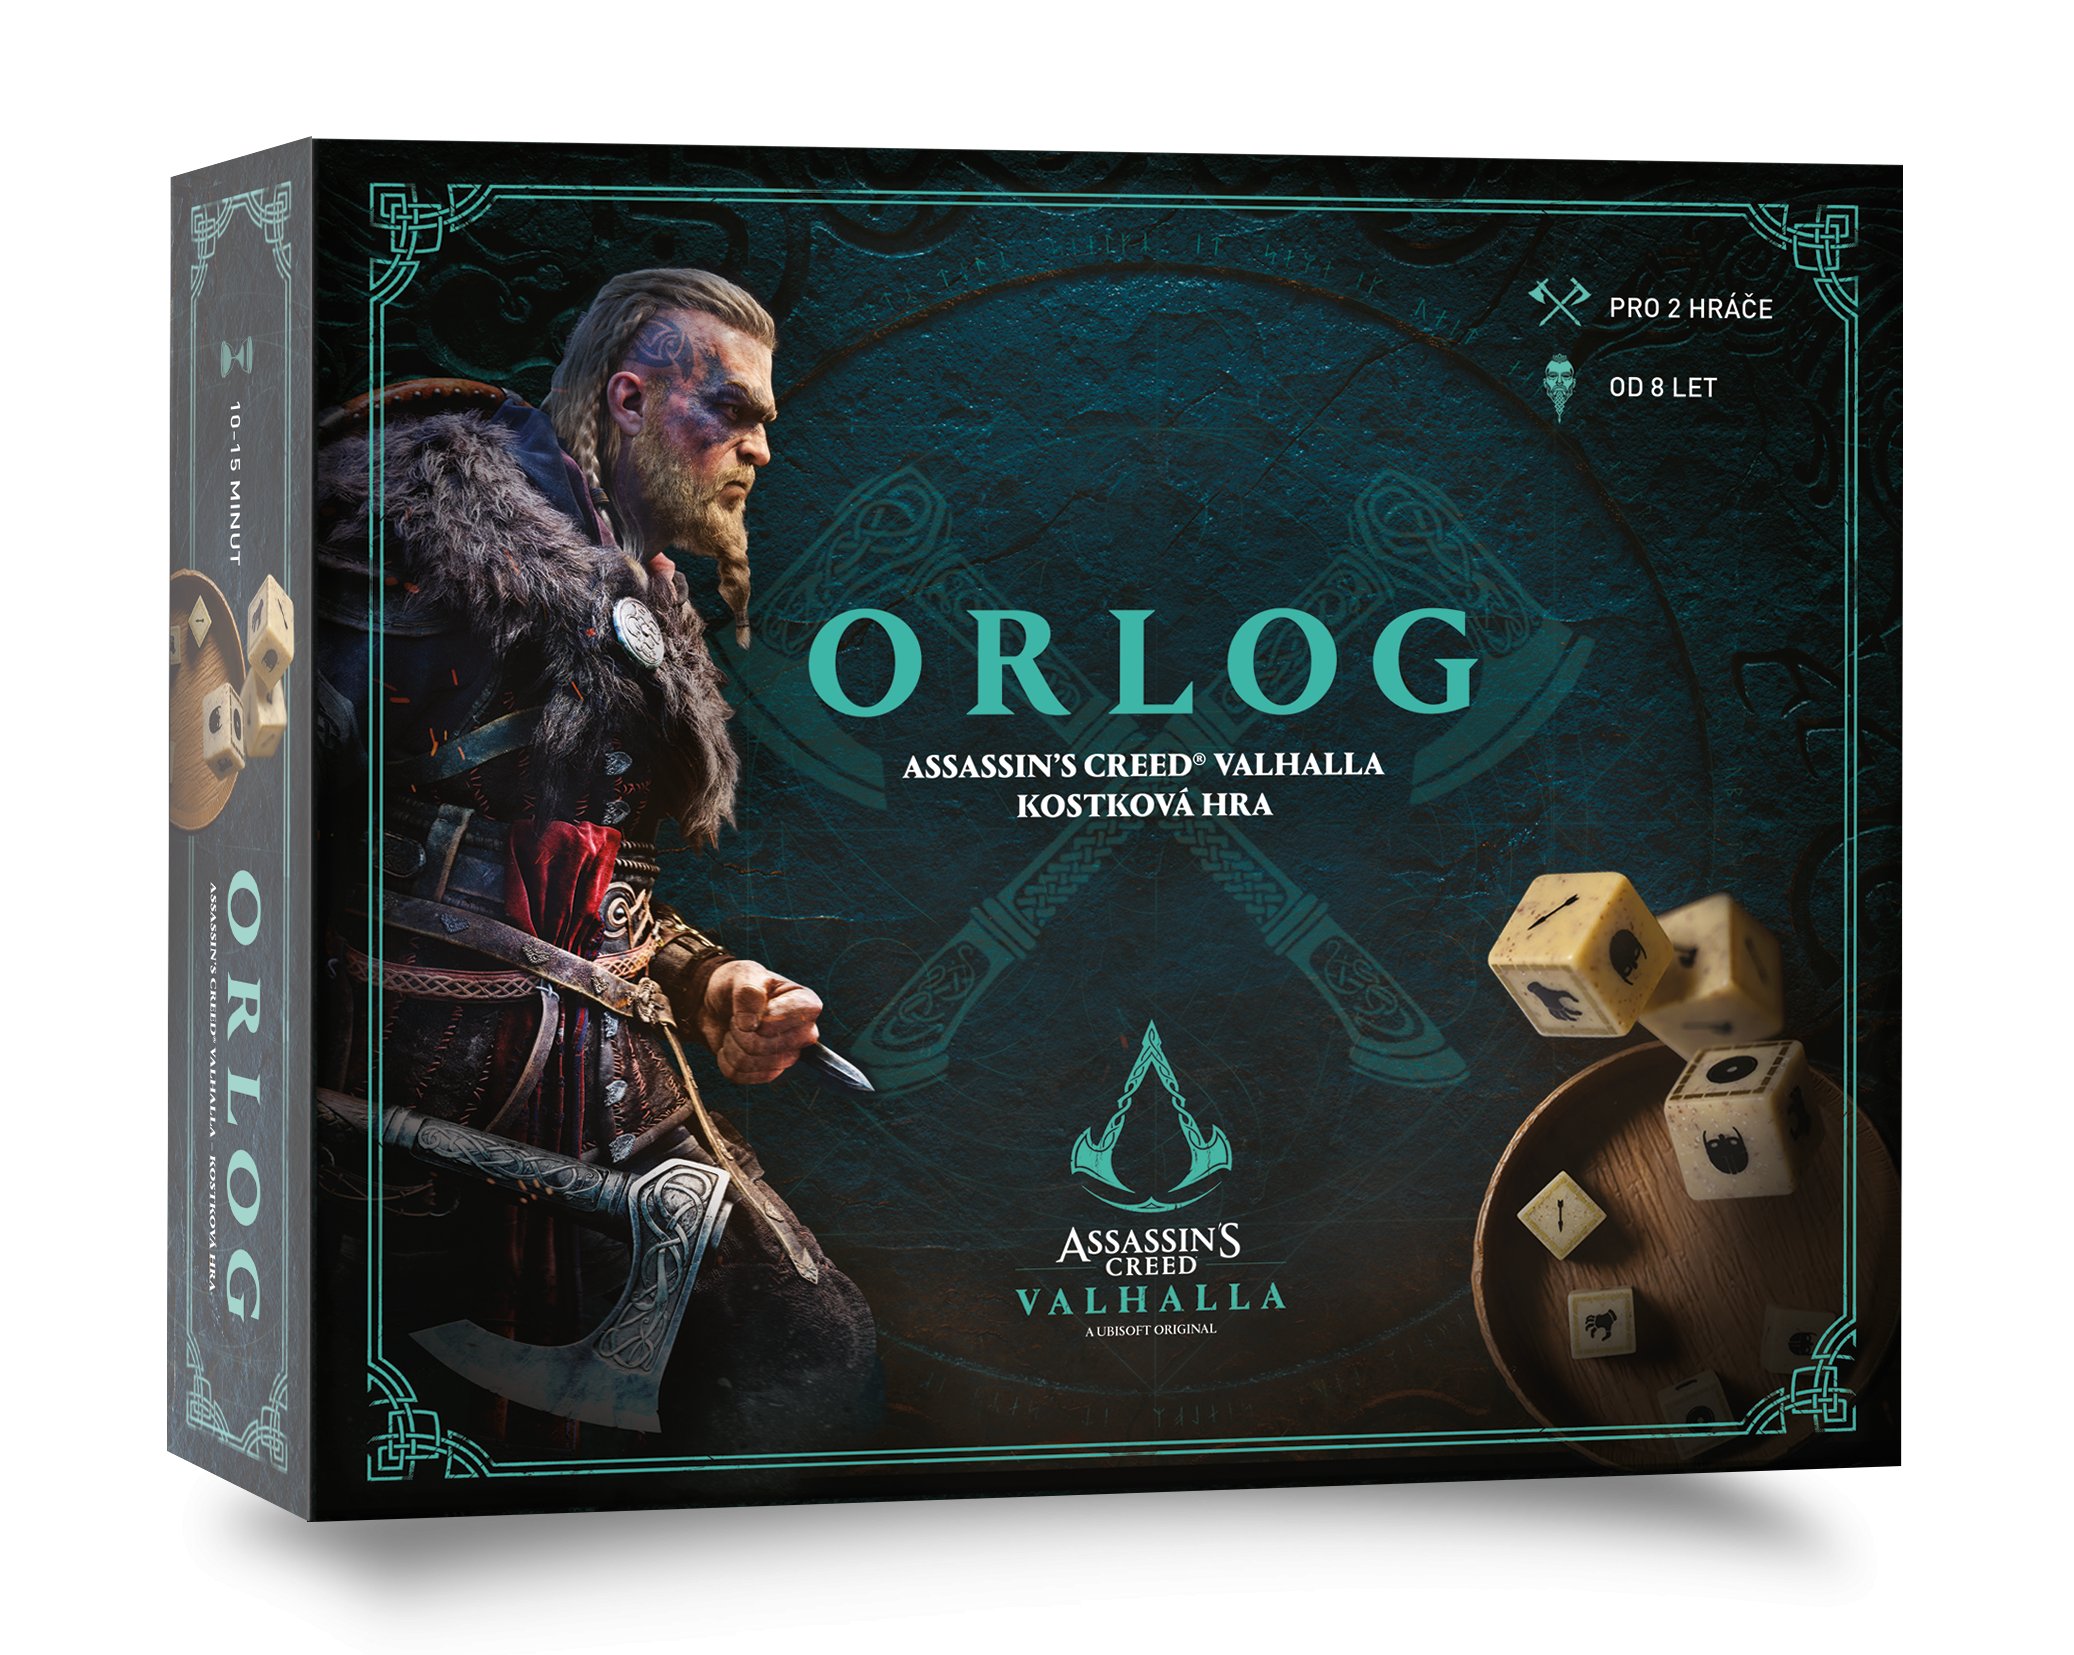 PUBLISHING TECHNOLOGY & SOLUTIONS Assassin’s Creed: Orlog